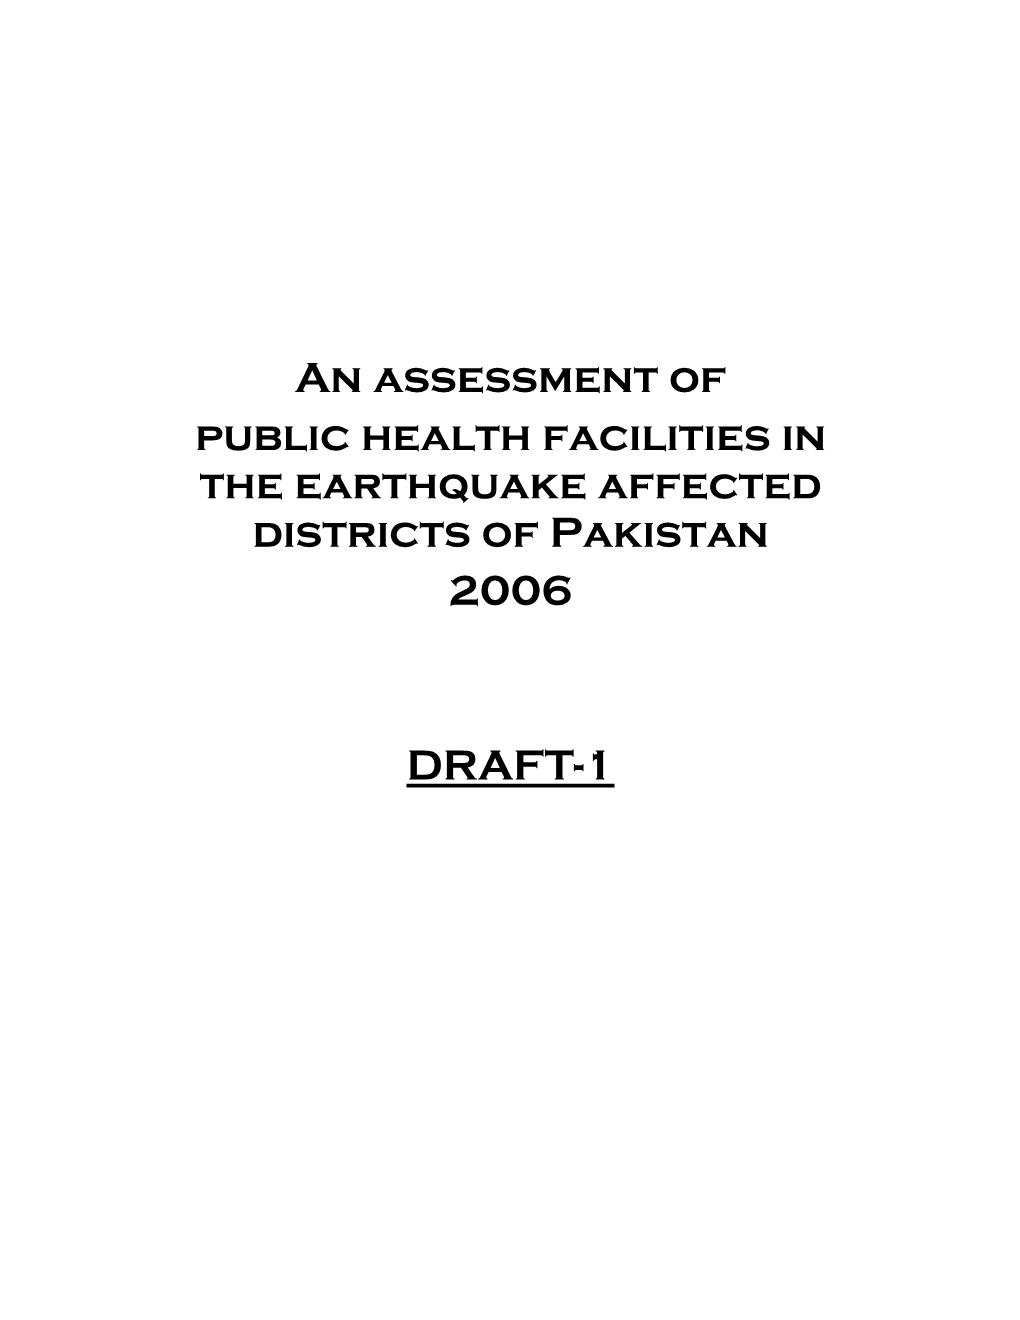 An Assessment of Public Health Facilities in the Earthquake Affected Districts of Pakistan 2006